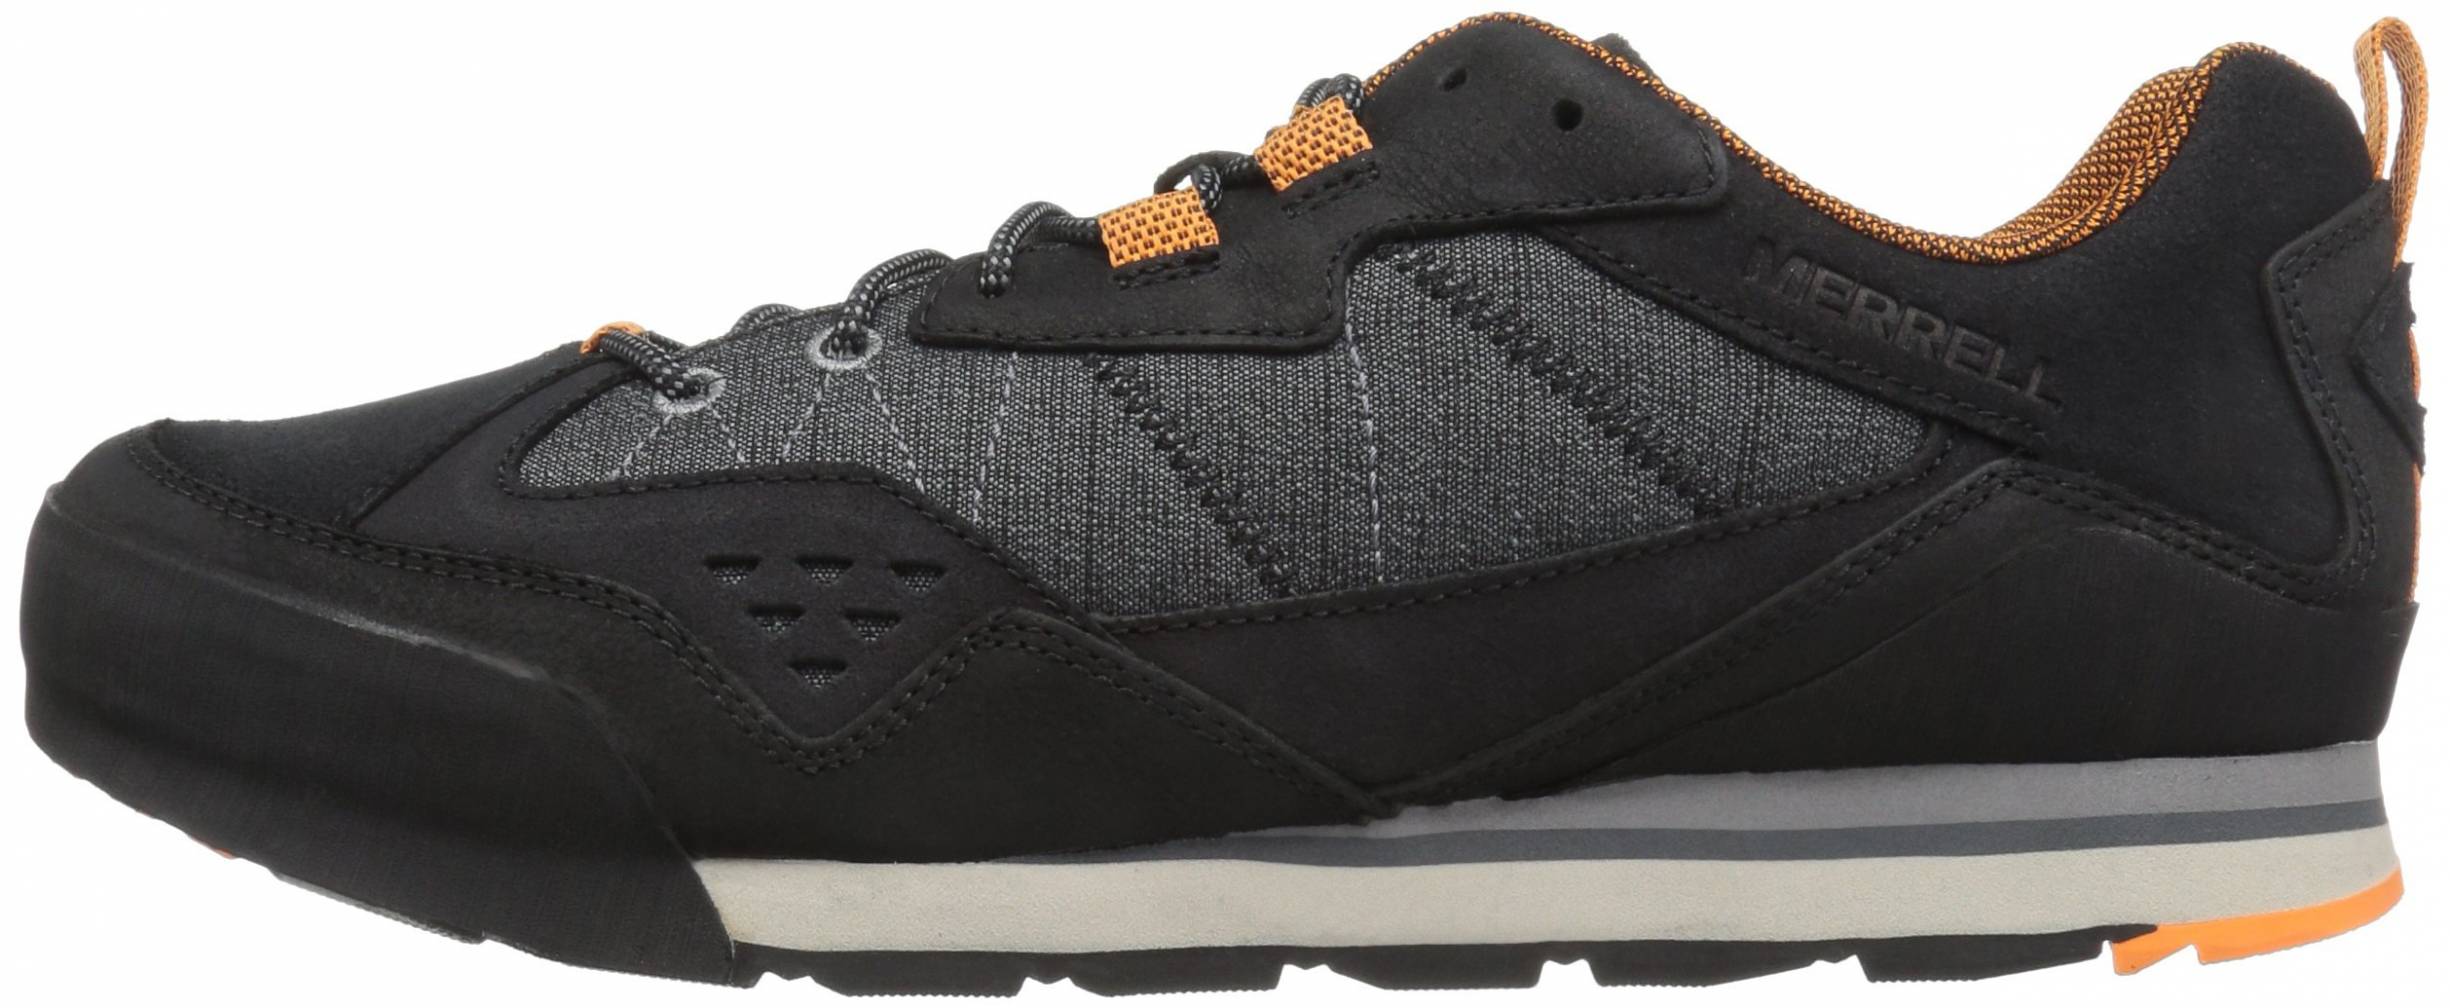 Only $45 + Review of Merrell Burnt Rock 